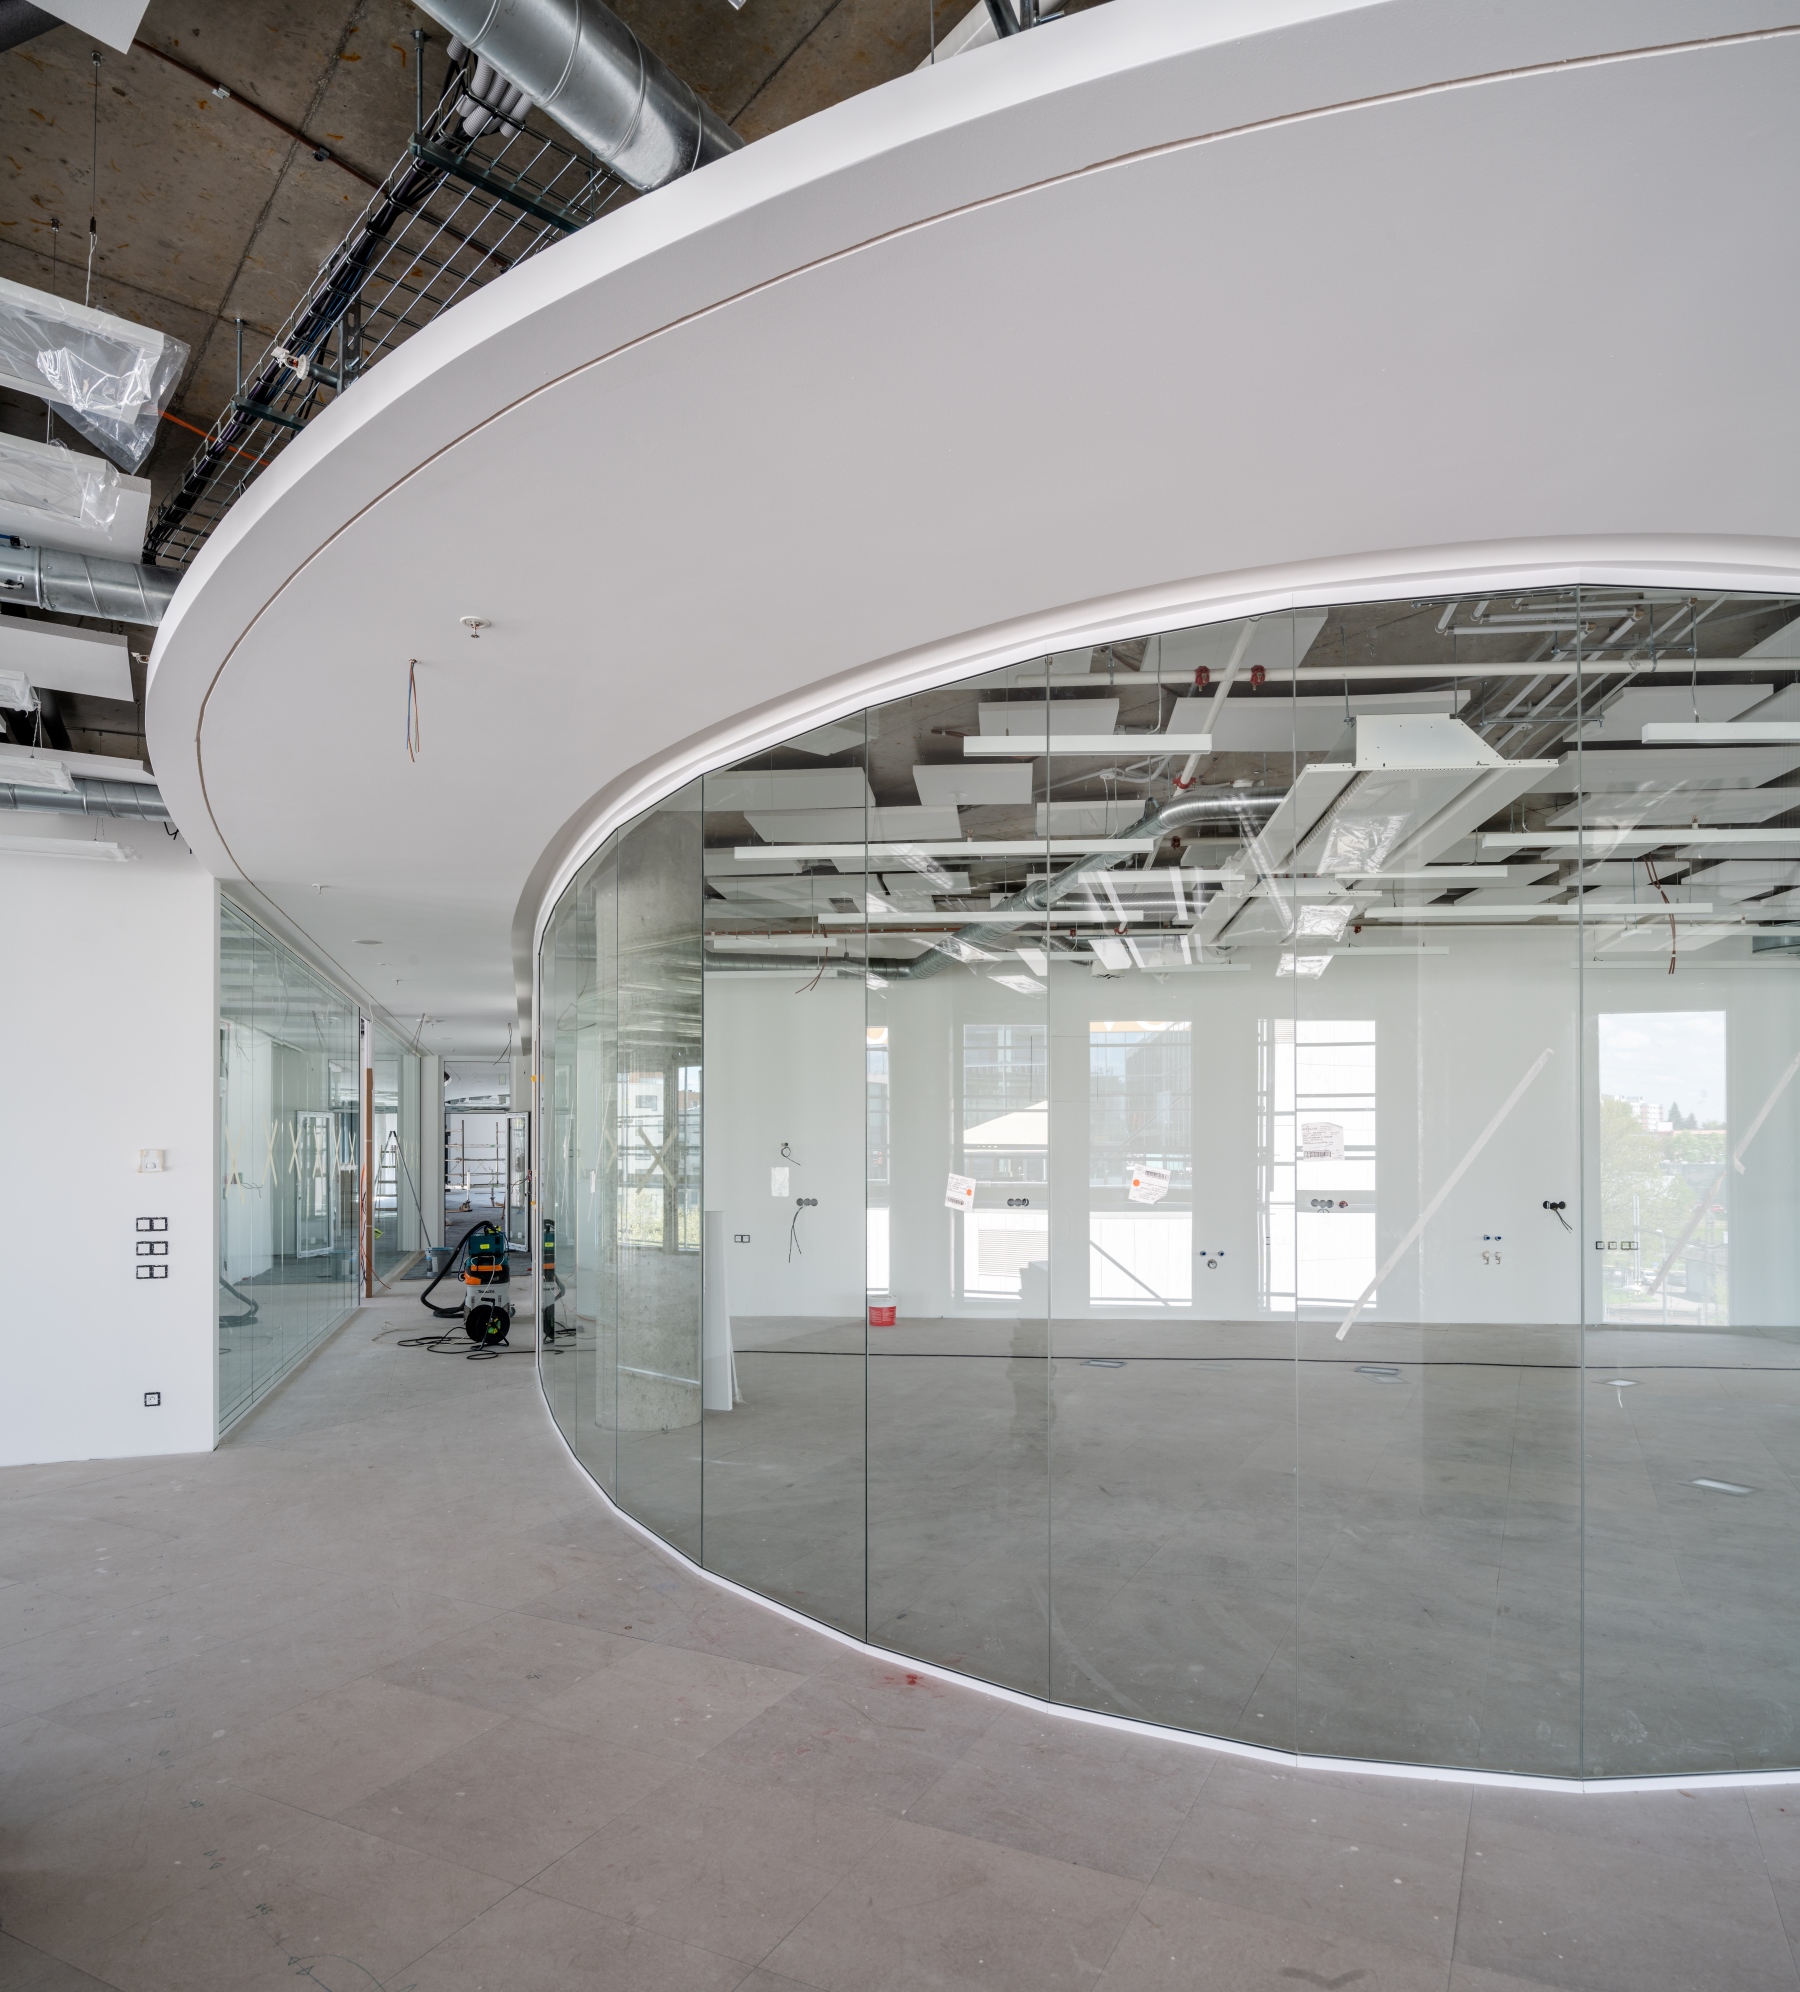 Rounded partitions in the office spaces of the Organica building.